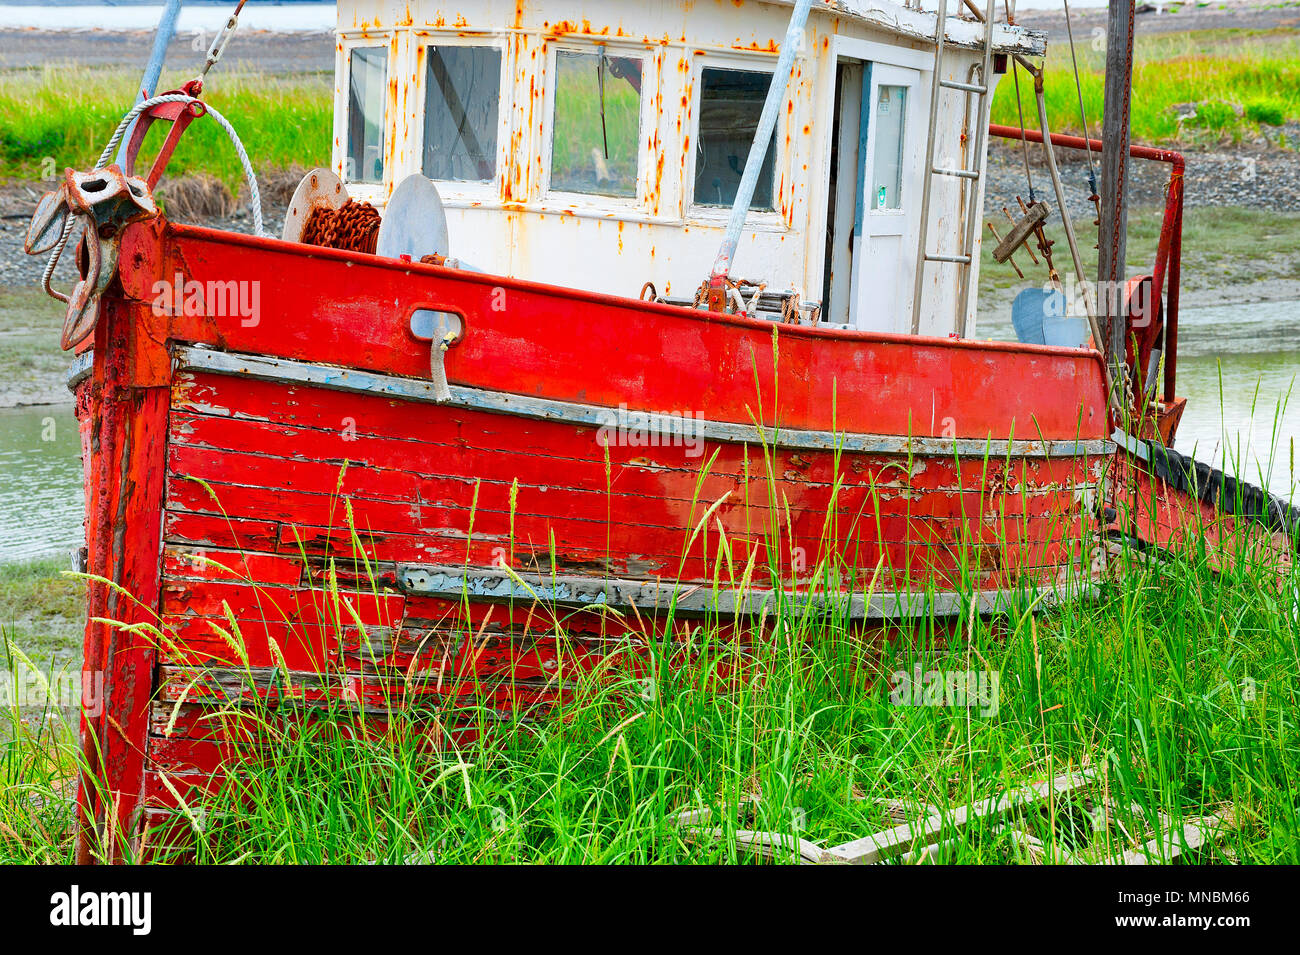 Decaying abandoned boat in a grassy field seen from walking path along the shores of Kachemak Bay in Homer Alaska. Stock Photo